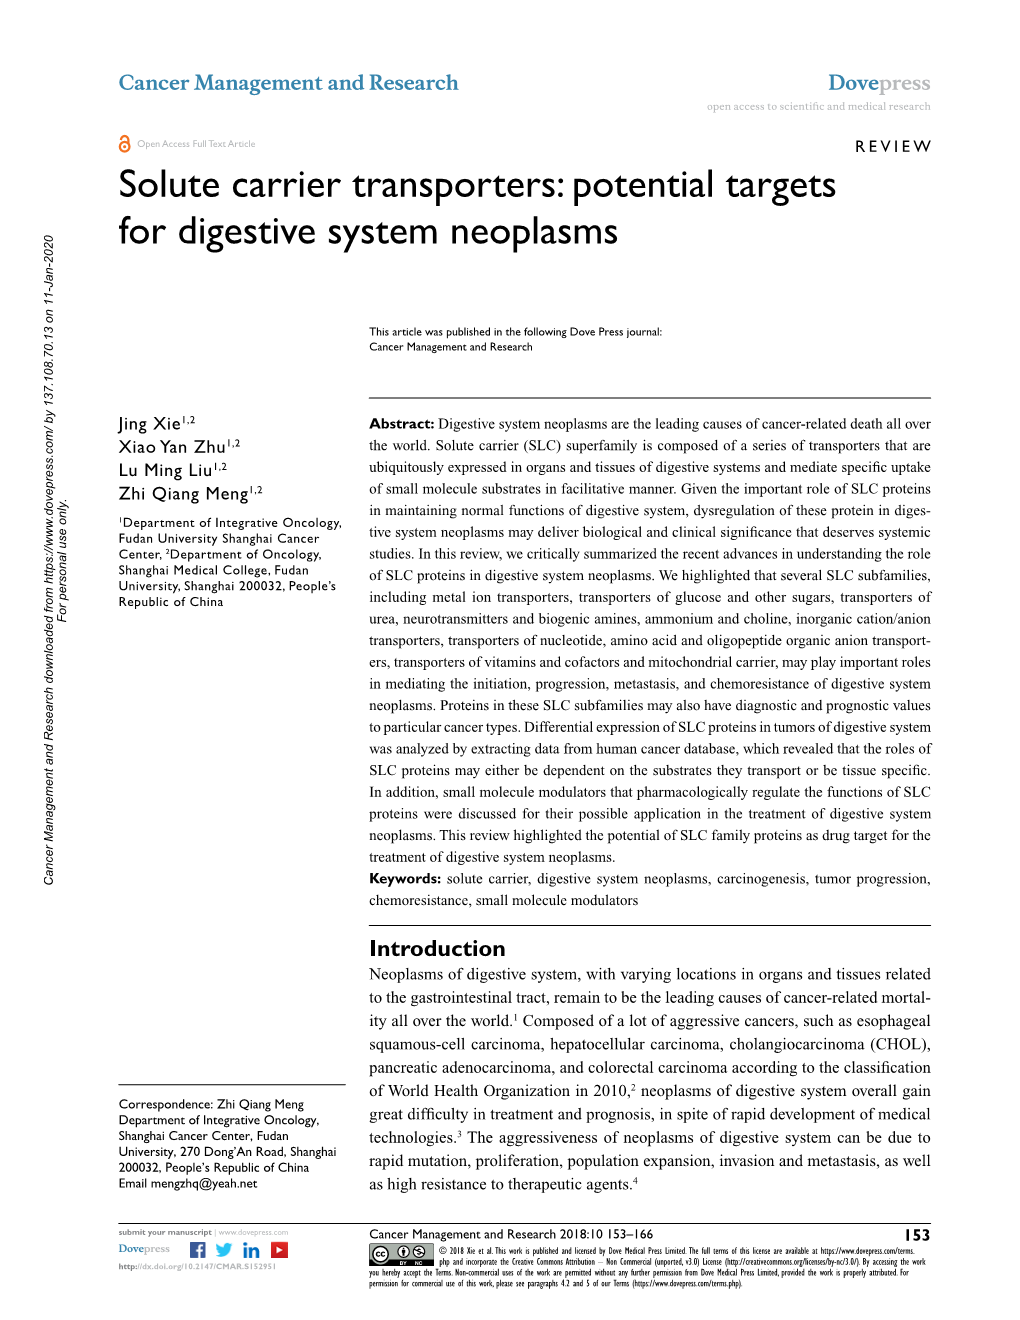 Solute Carrier Transporters: Potential Targets for Digestive System Neoplasms